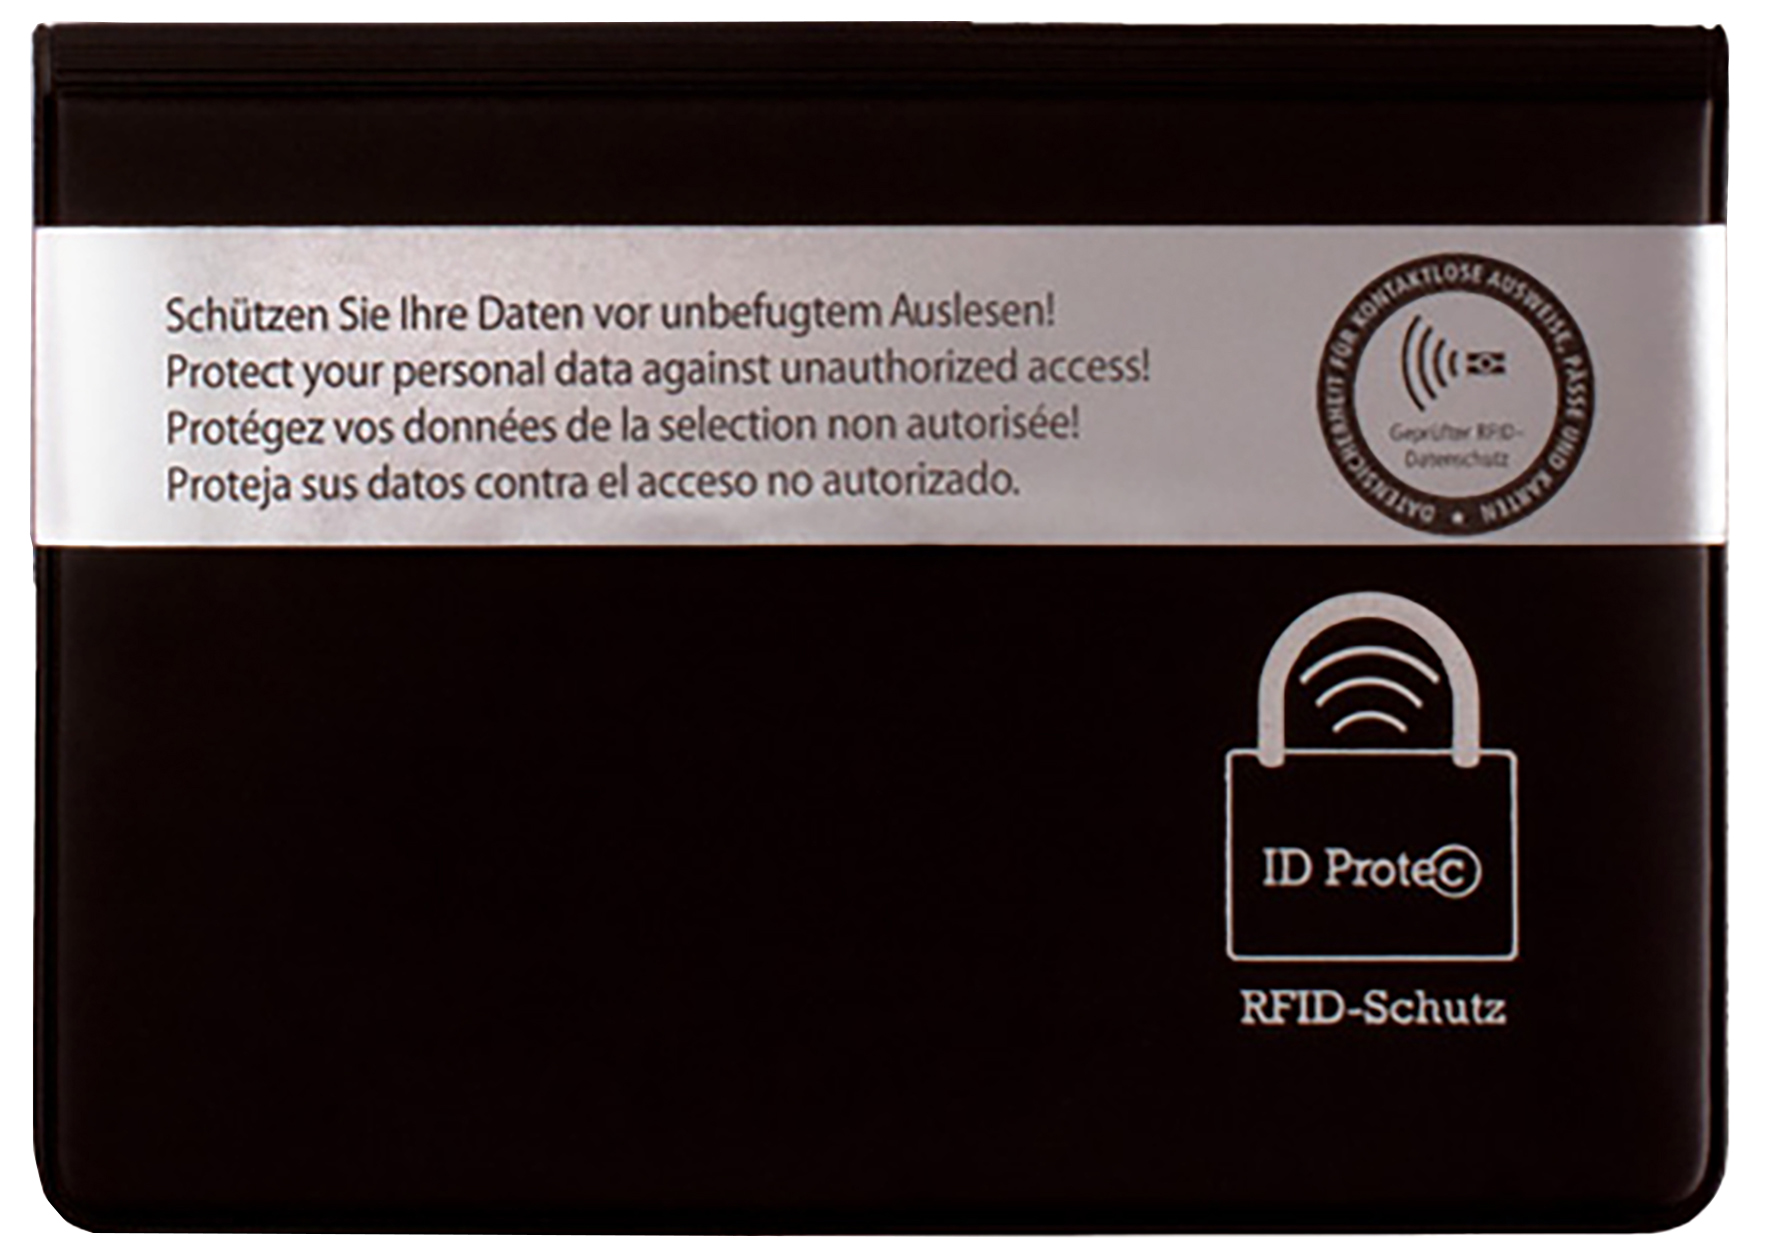 RFID protective sleeve for e-identity card and 3 additional cards